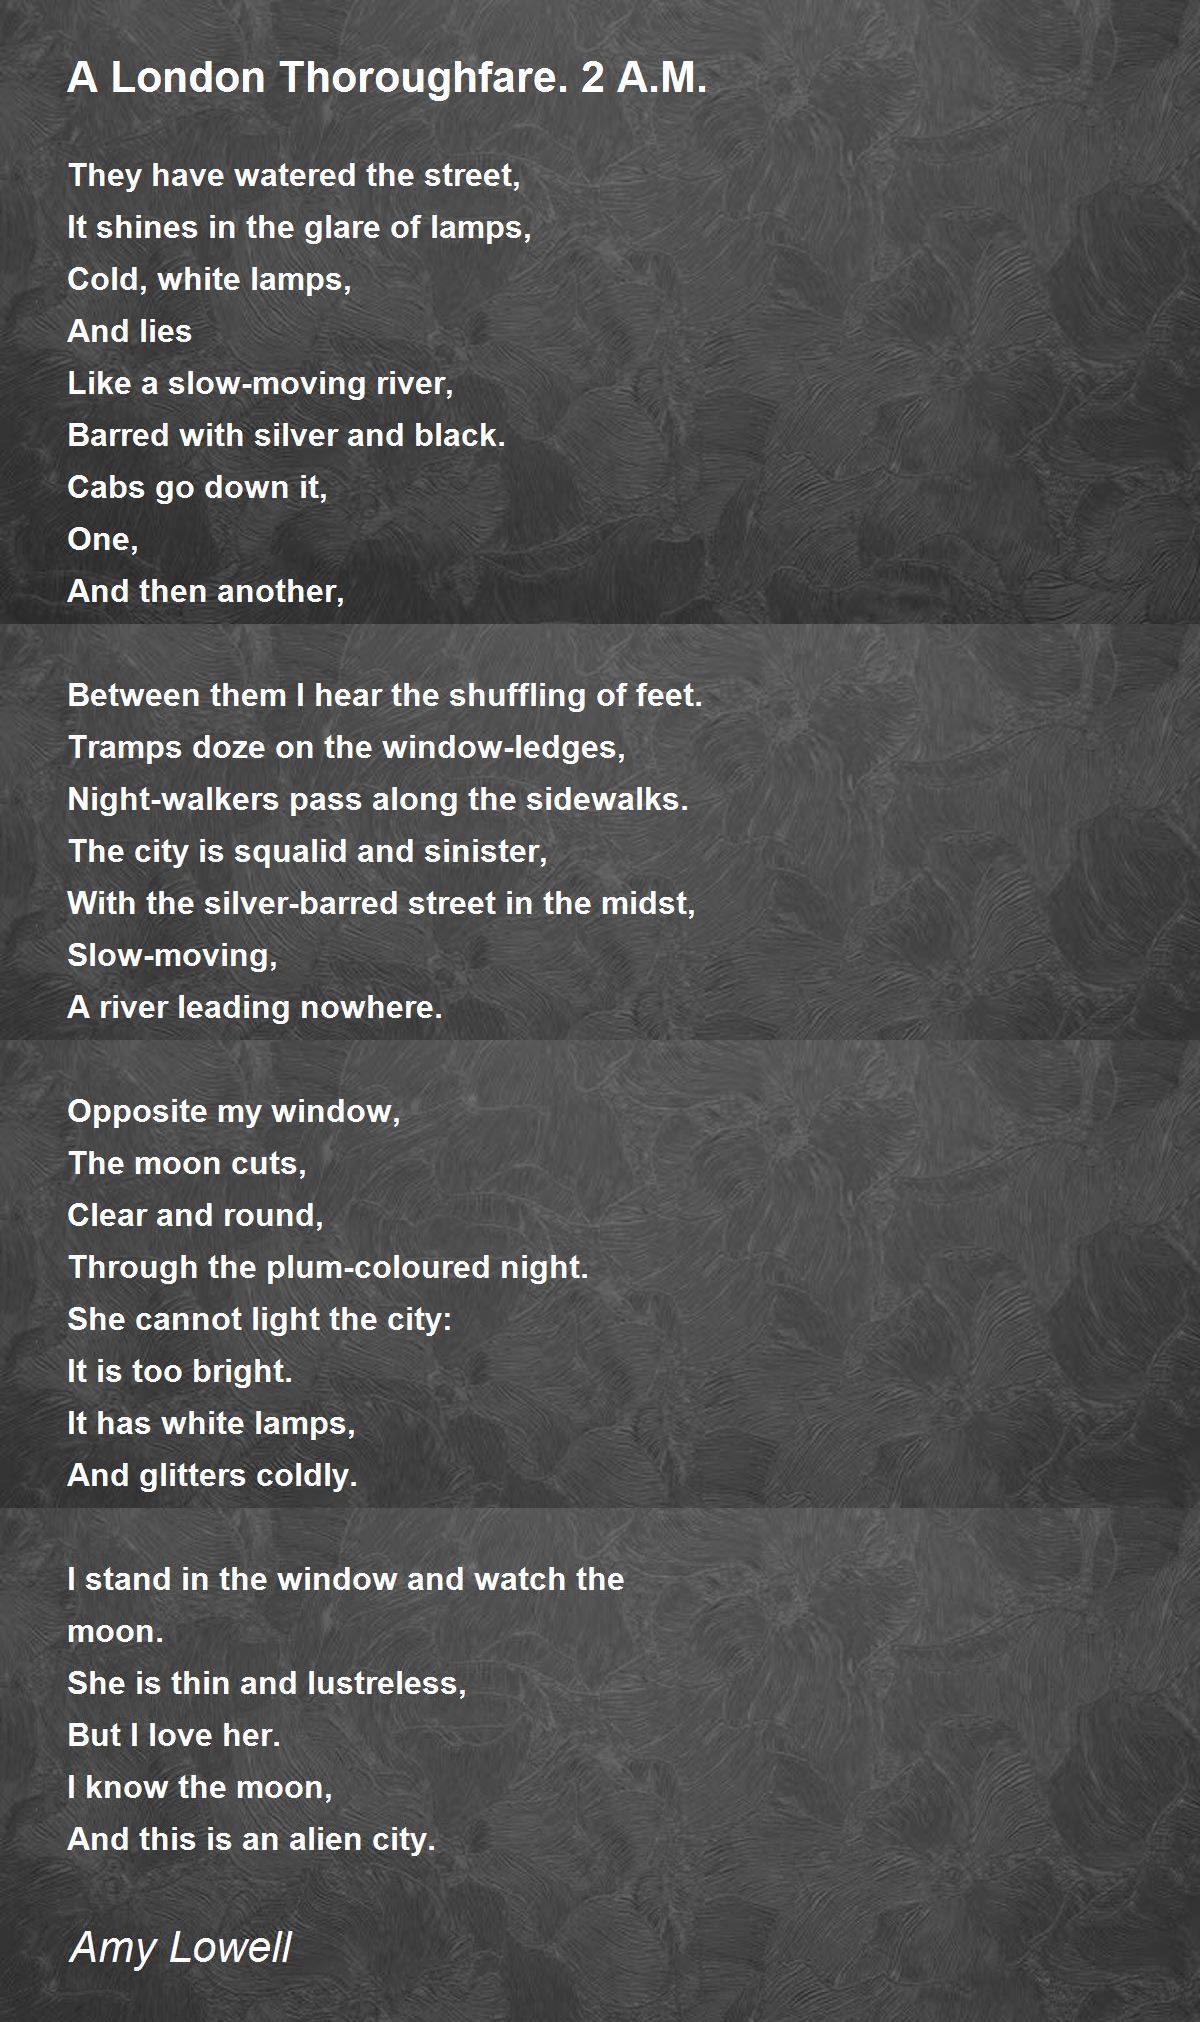 A London Thoroughfare. 2 A.M. Poem by Amy Lowell - Poem Hunter Comments